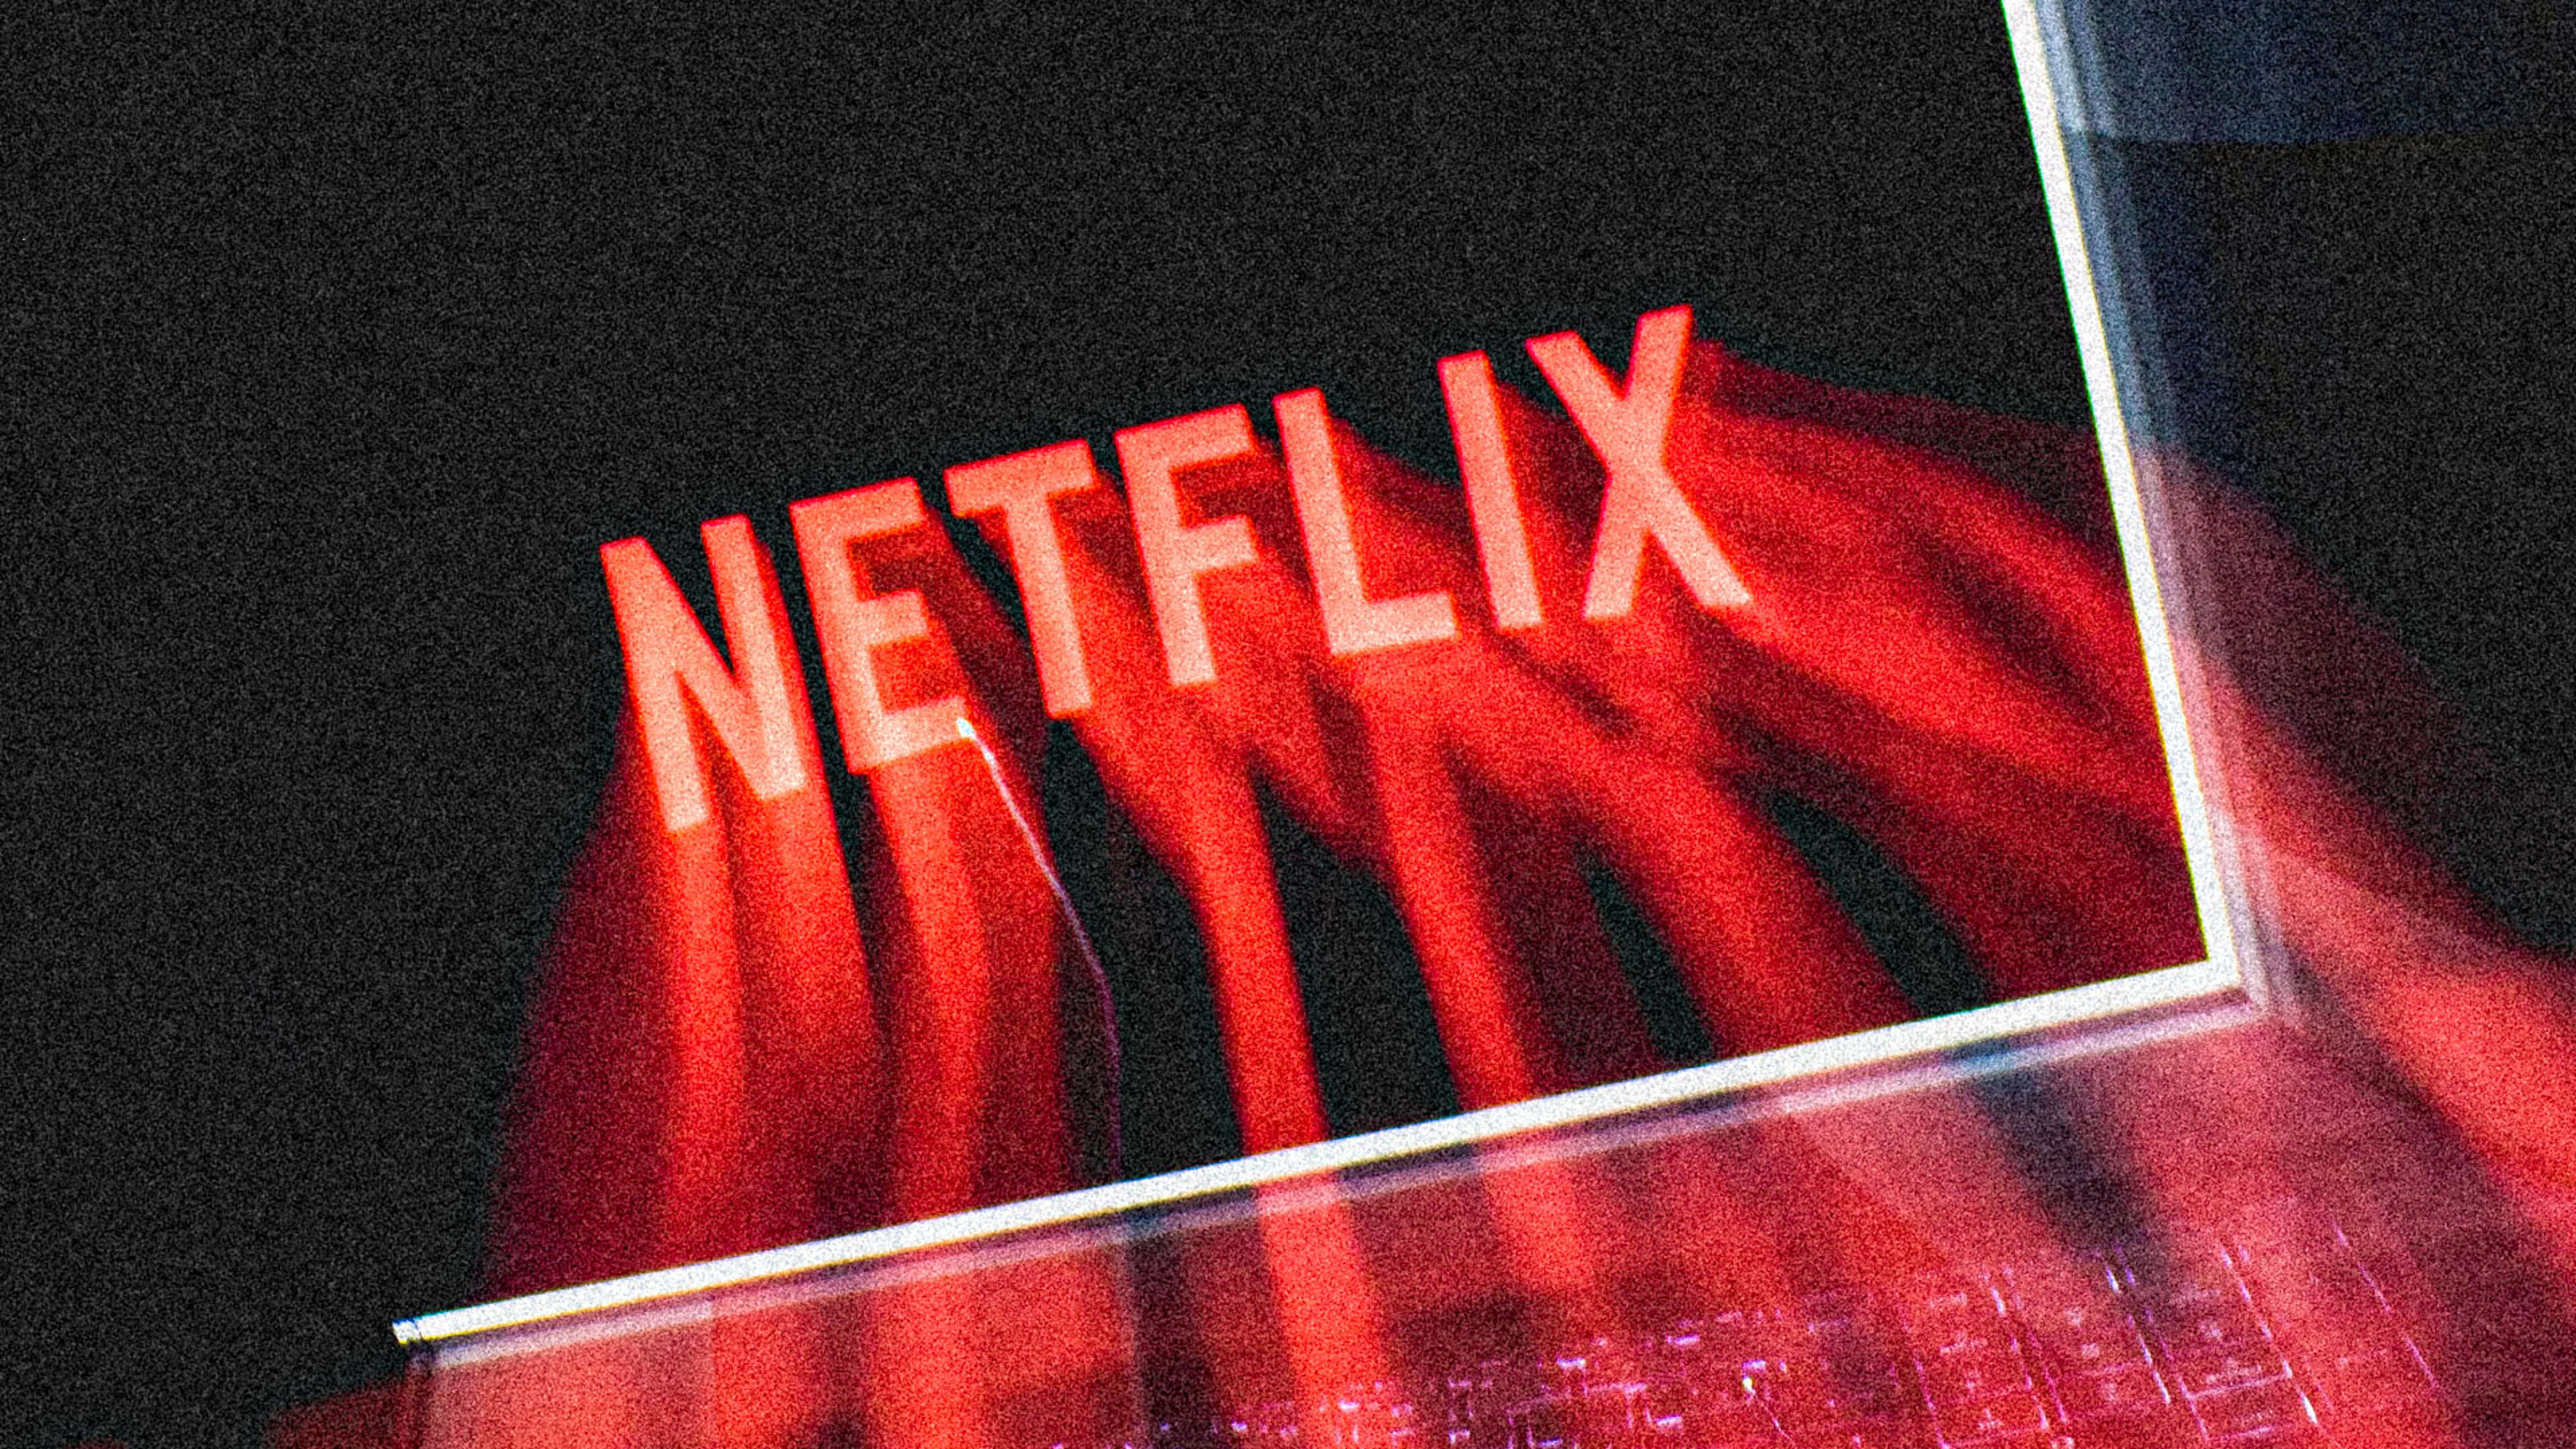 Netflix’s crackdown on password sharing was good for the bottom line, but bad for the brand